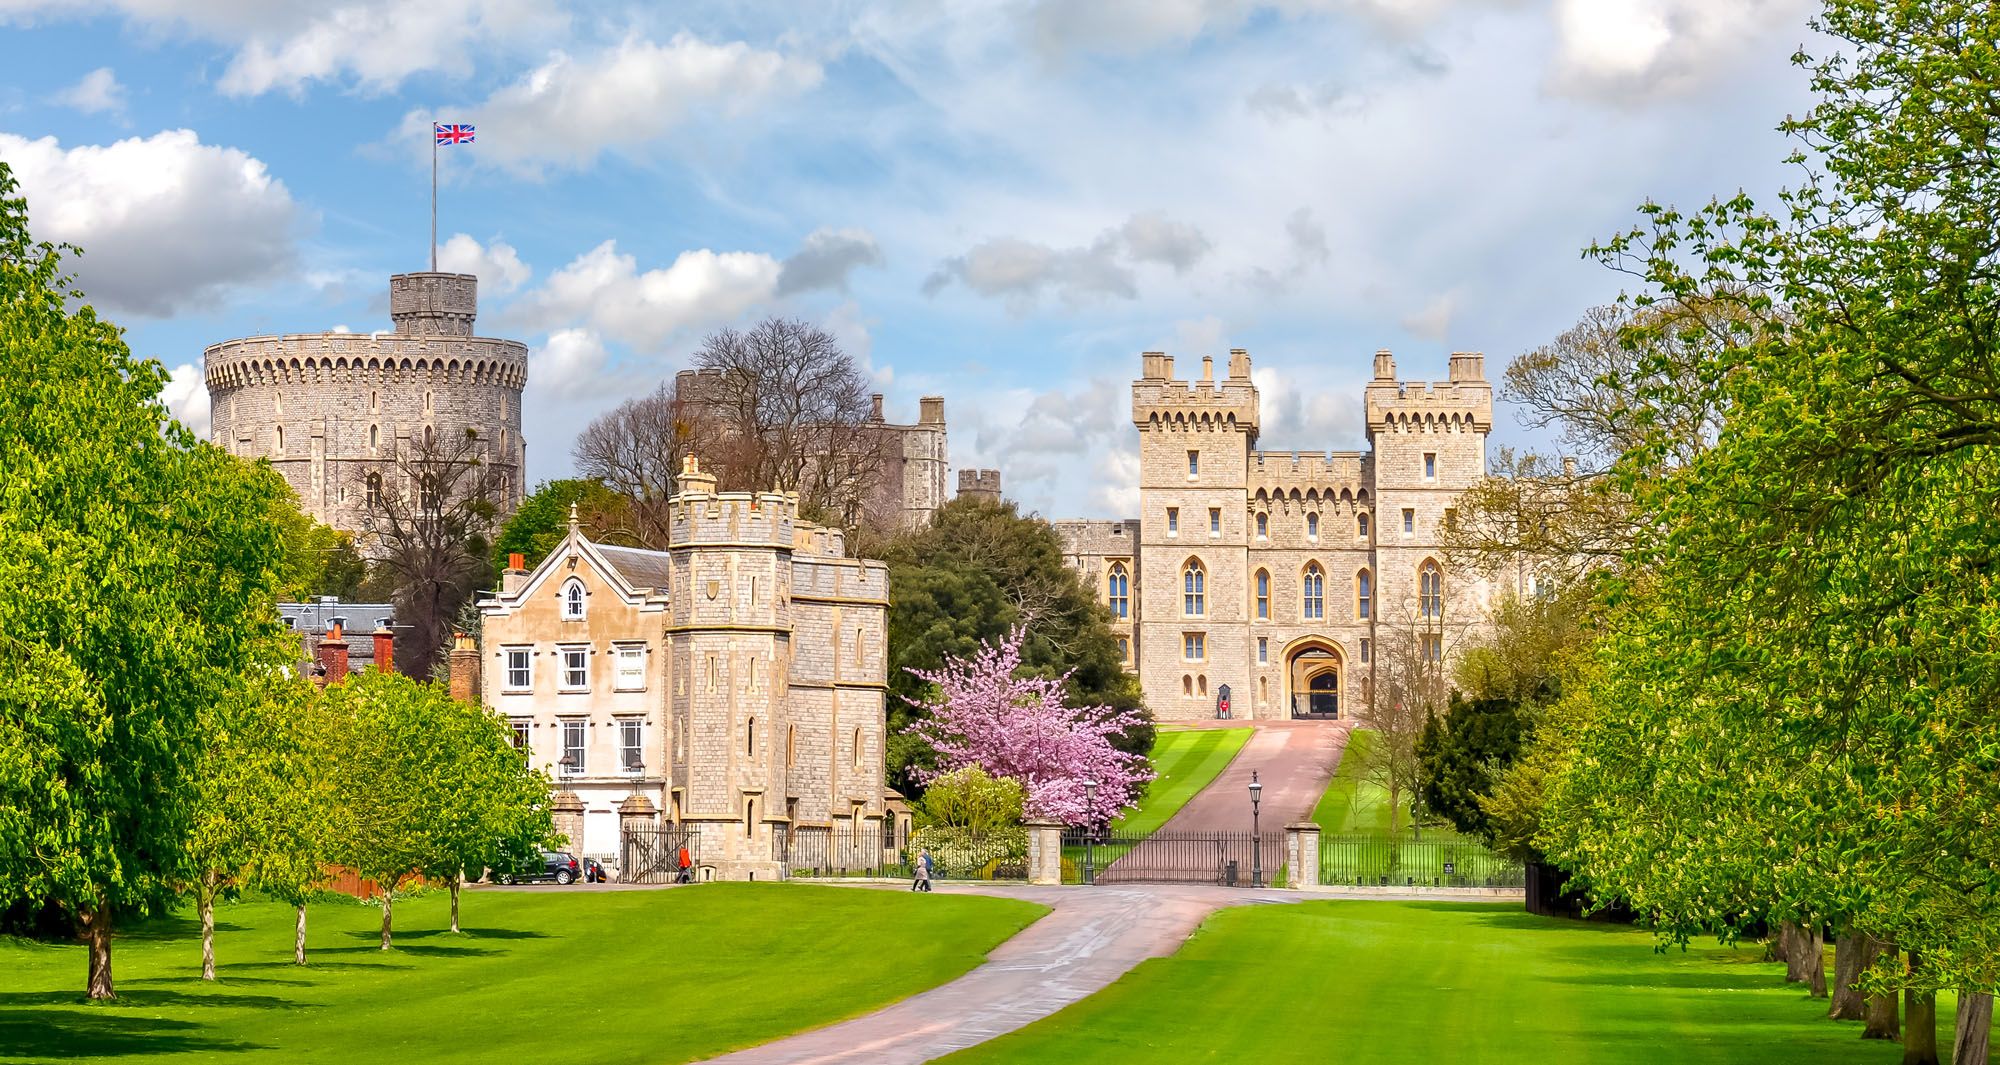 Featured image for “Windsor Castle Day Trip from London: Planning Guide & Tips”